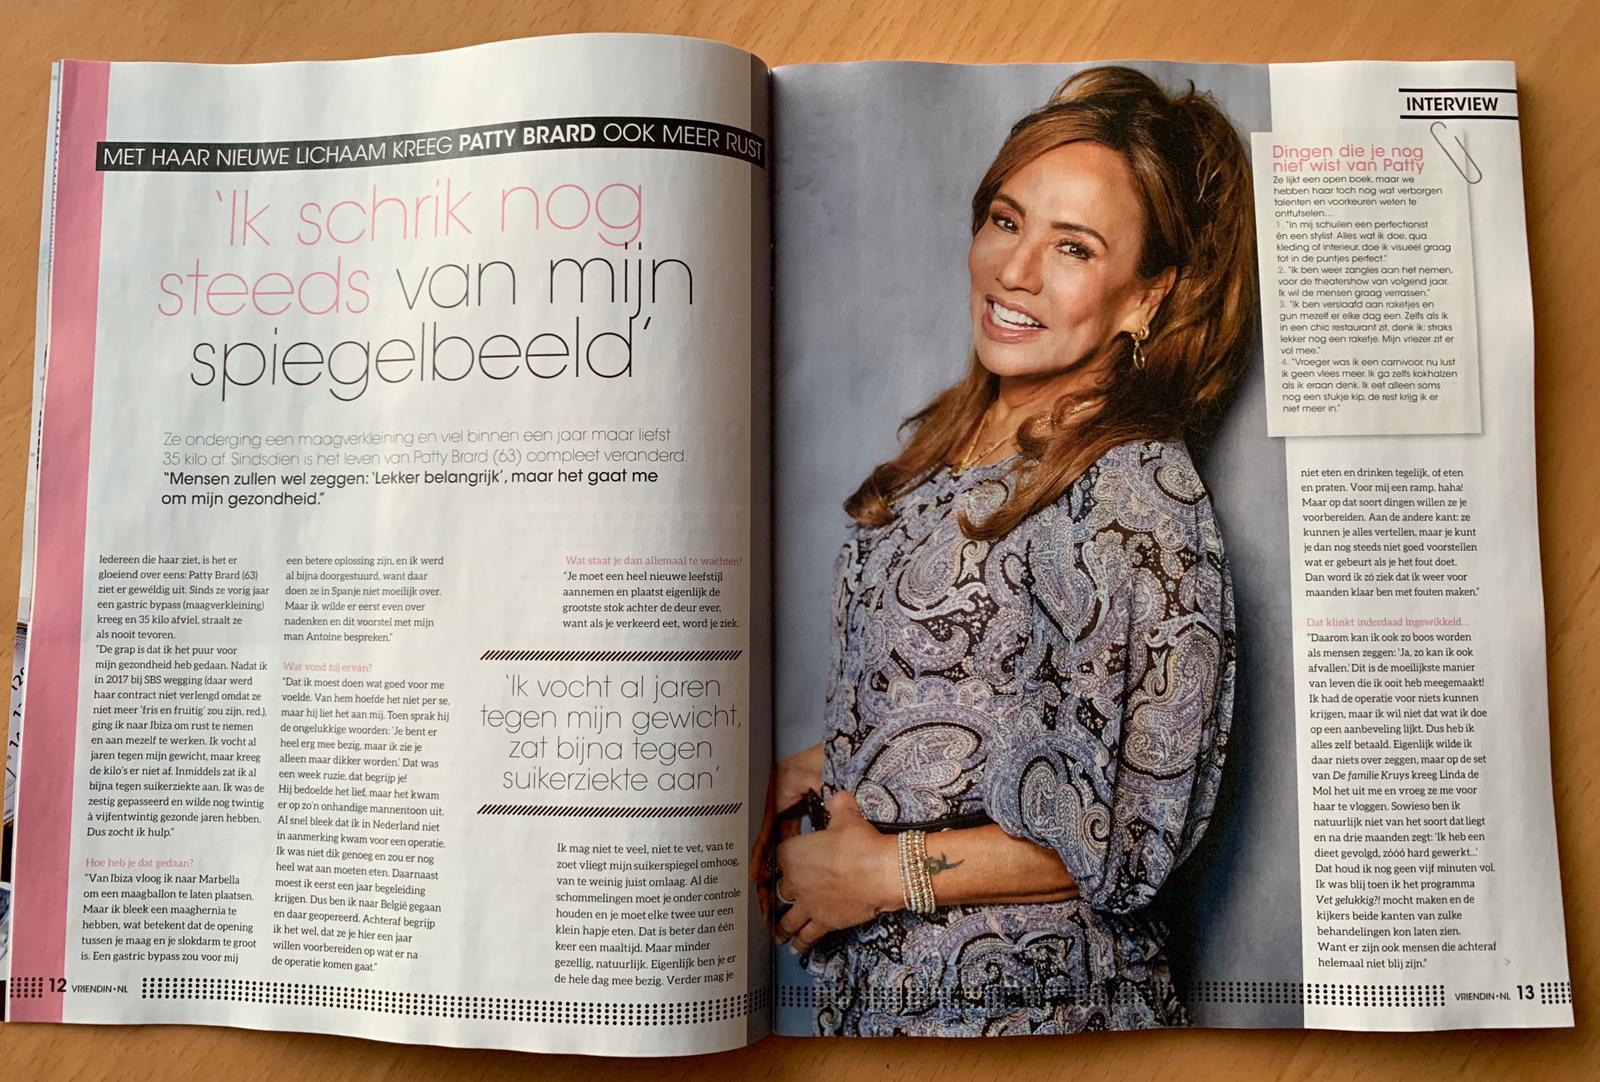 meerderheid Het hotel Uitsluiting All About LUV' (past, present, future and more): Patty Brard in the press